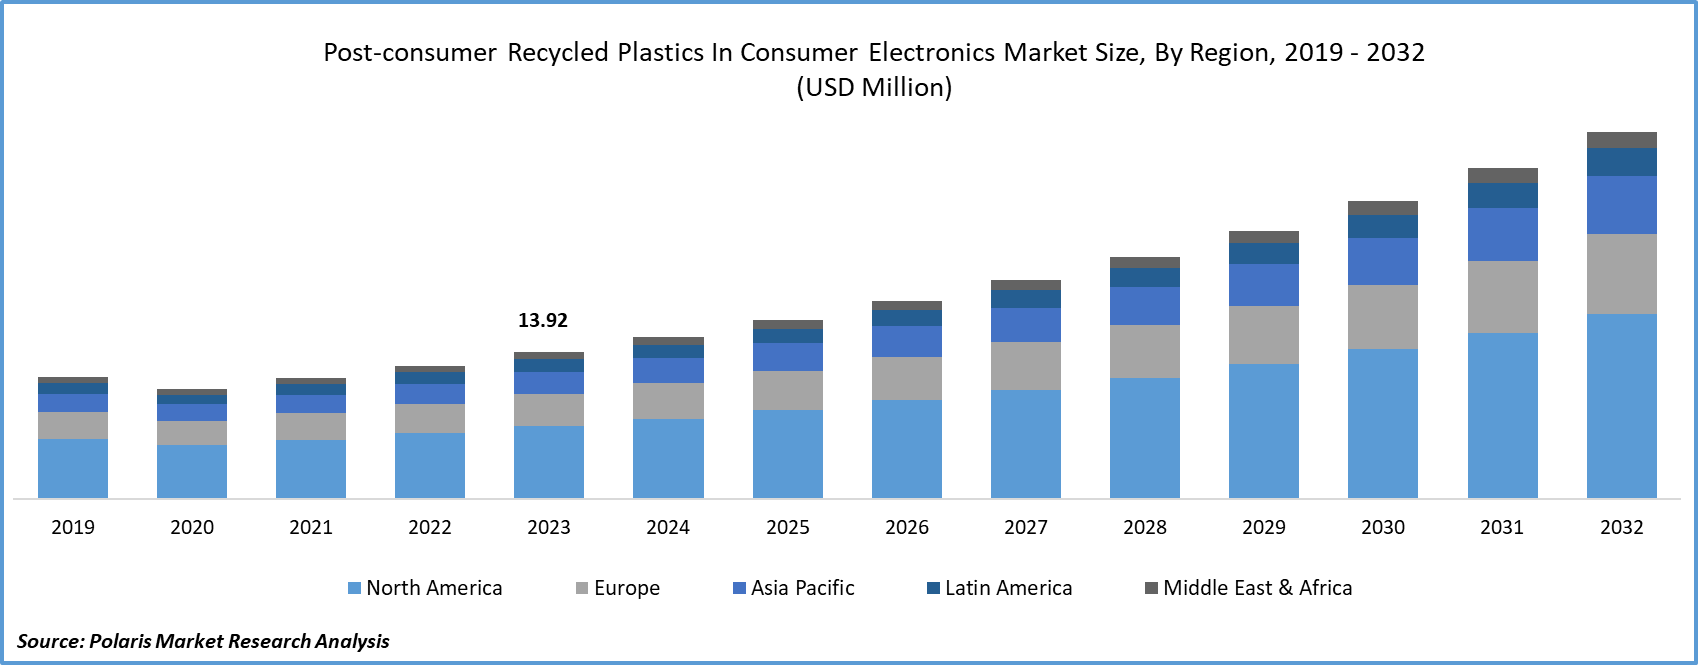 Post-consumer Recycled Plastics in Consumer Electronics Market Size